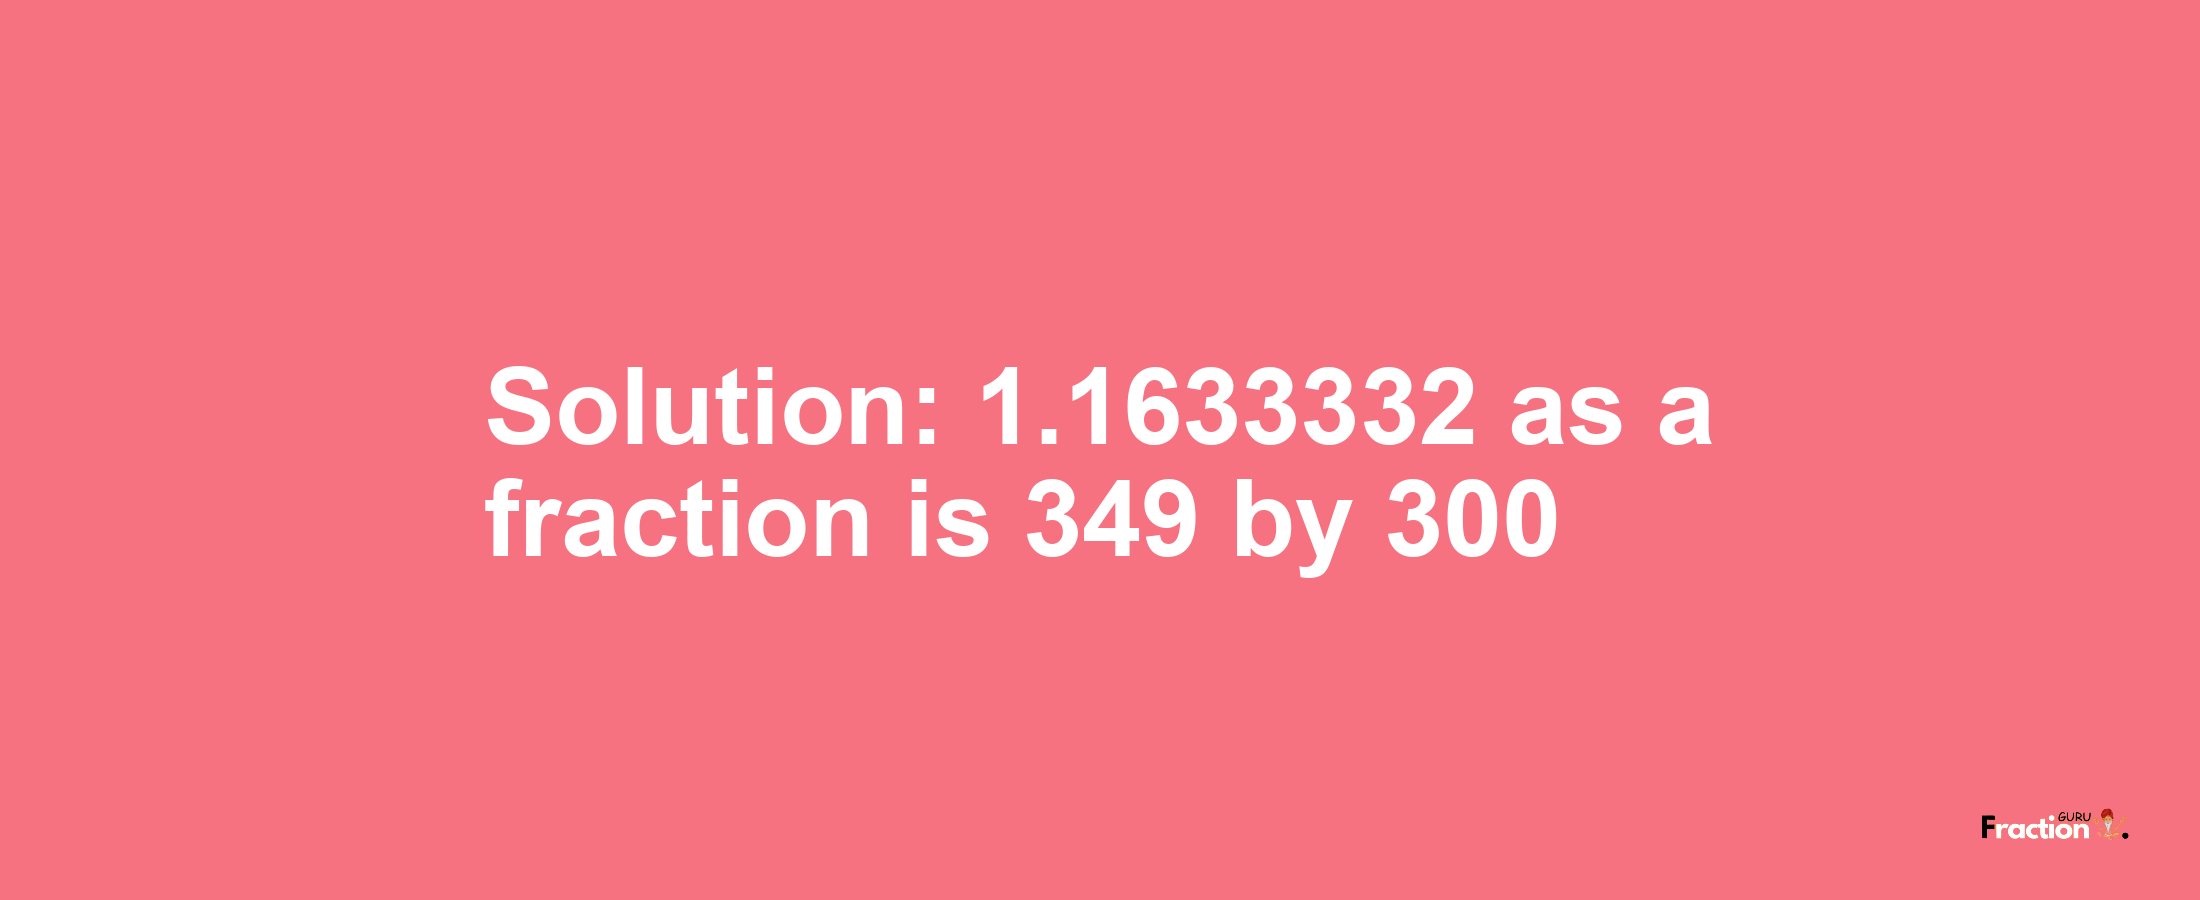 Solution:1.1633332 as a fraction is 349/300